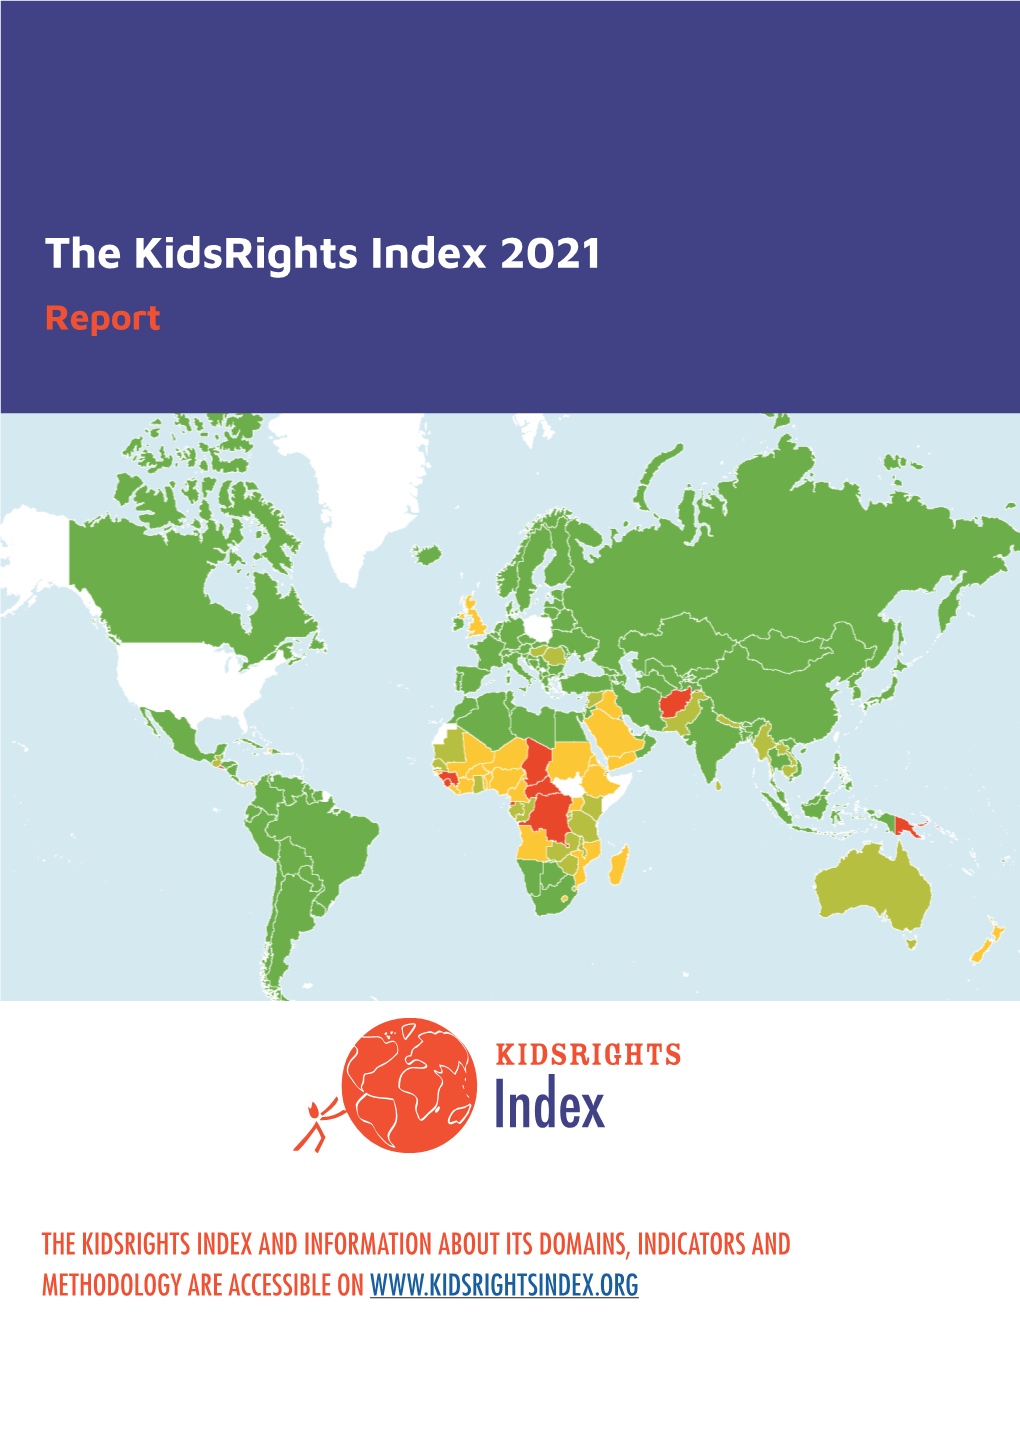 The Kidsrights Index 2021 Report